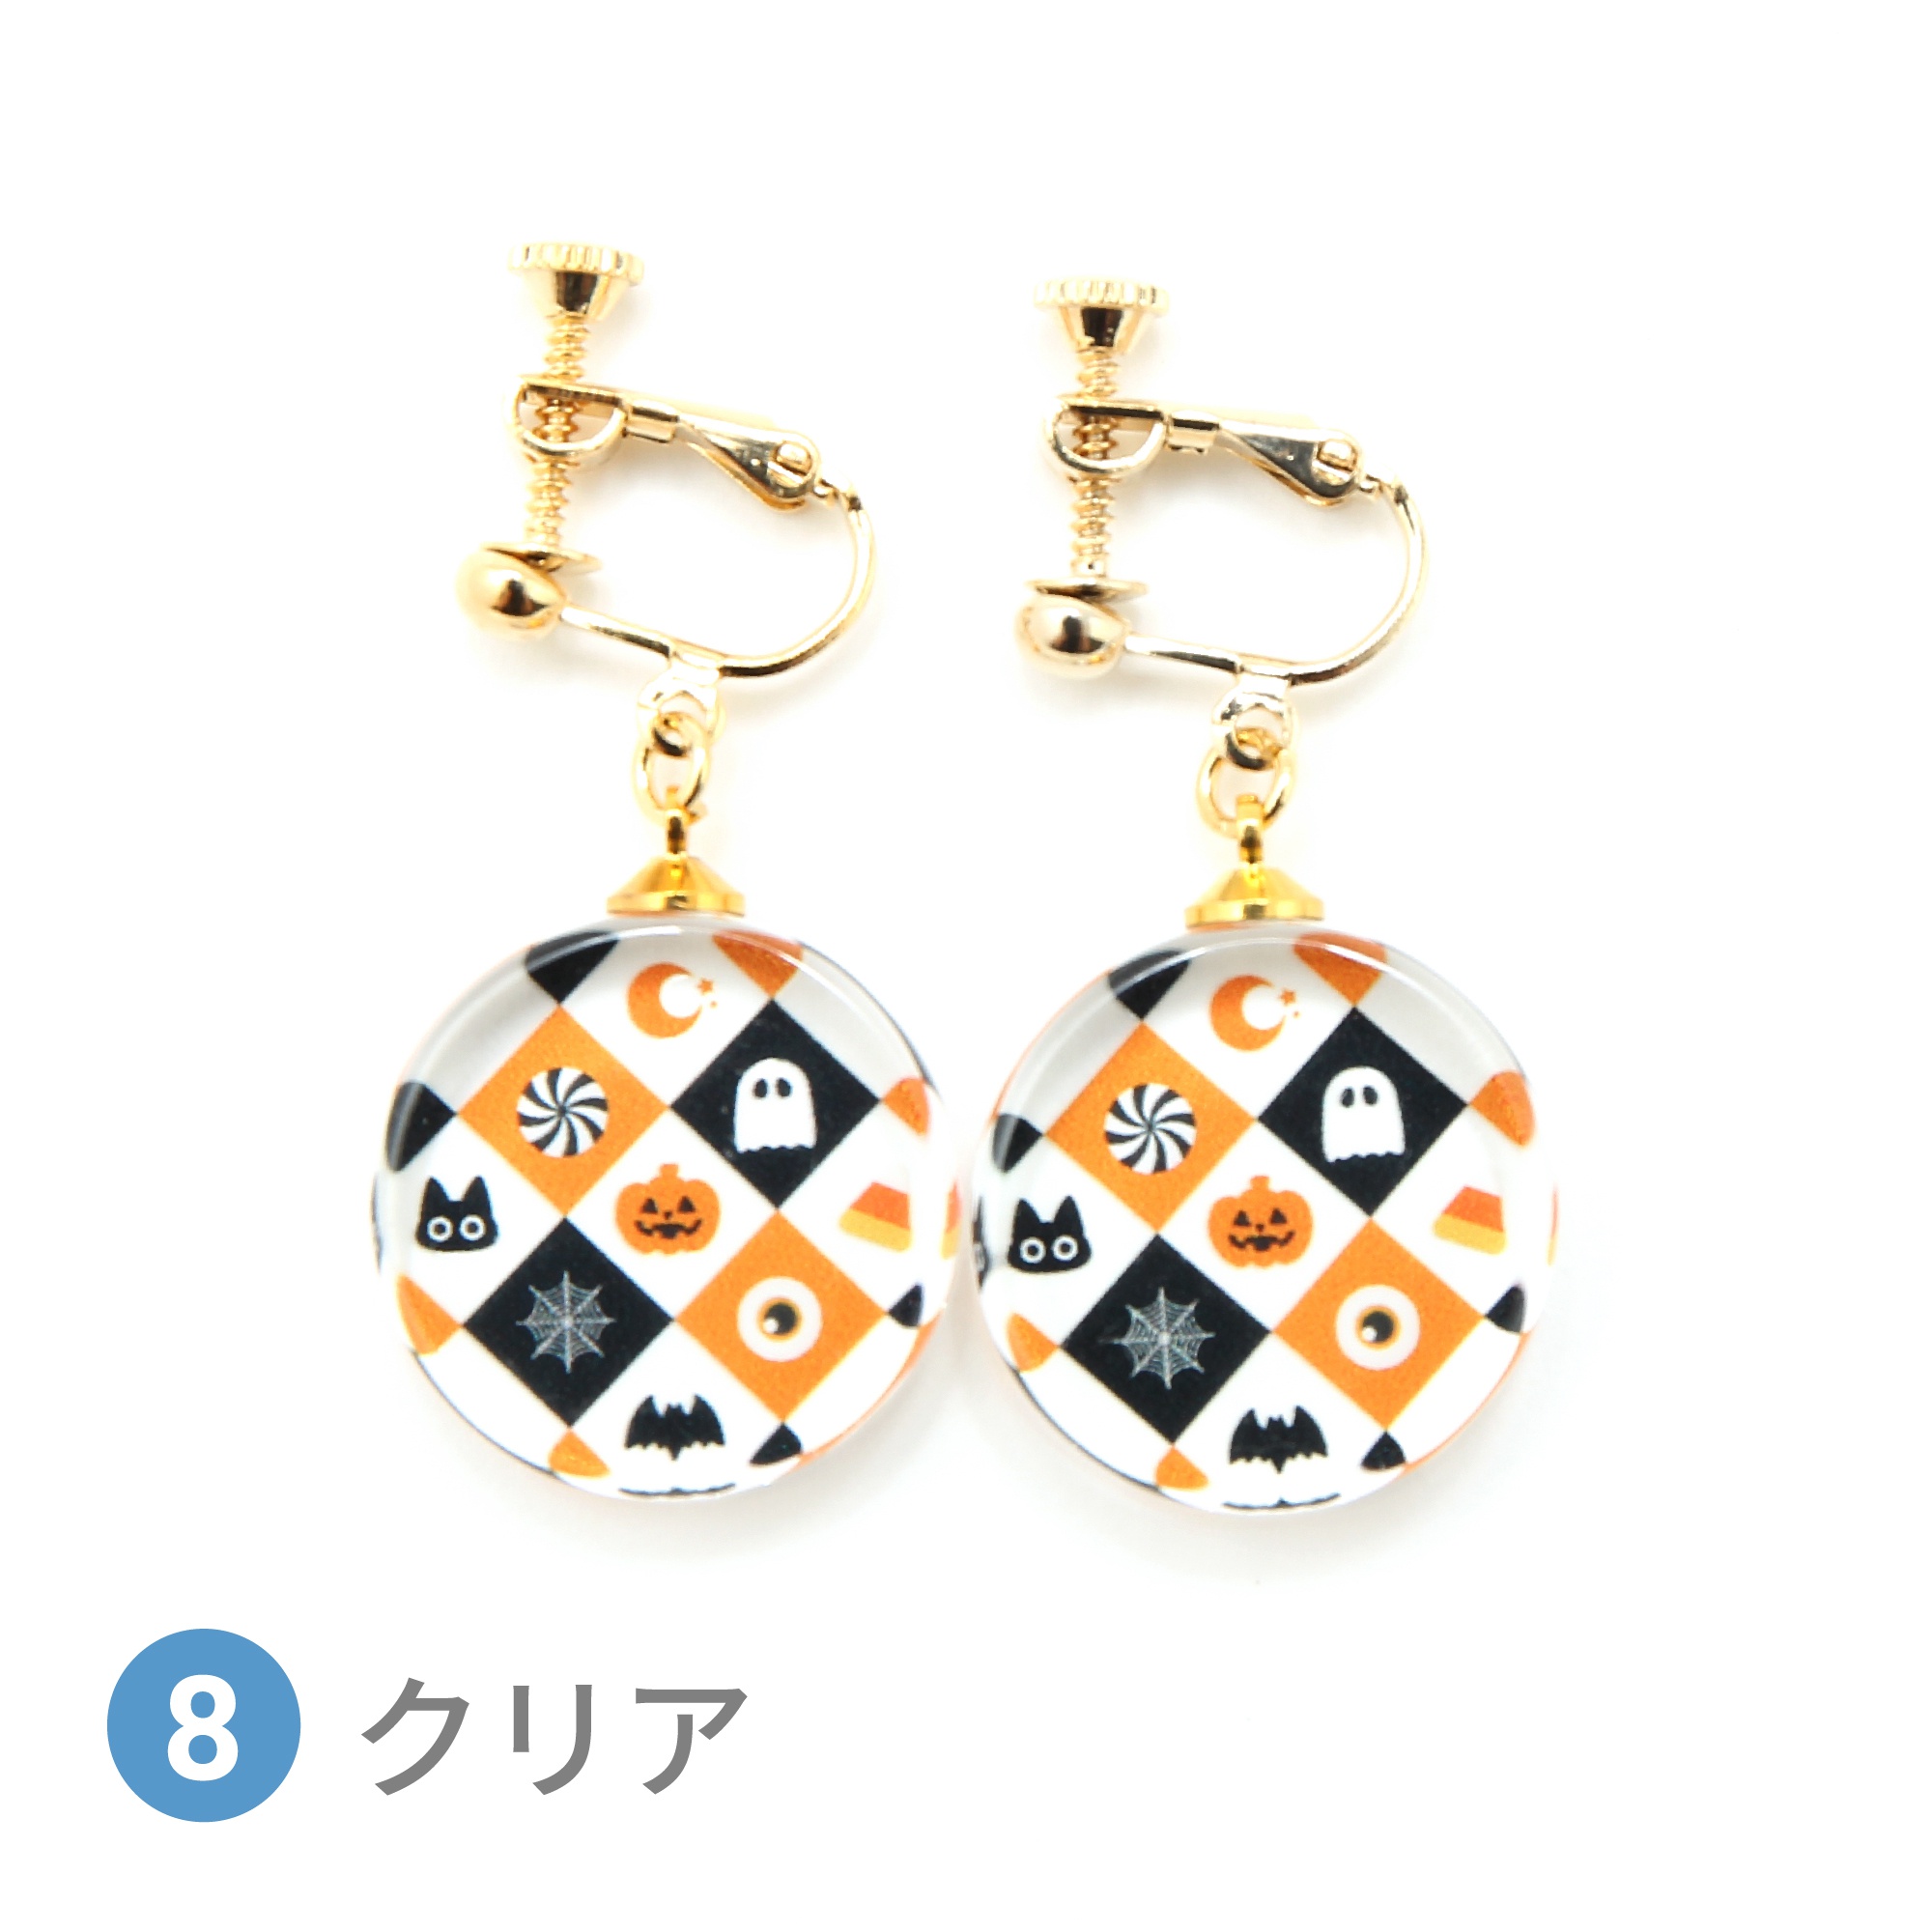 Glass accessories Earring HALLOWEEN PATTERN clear round shape